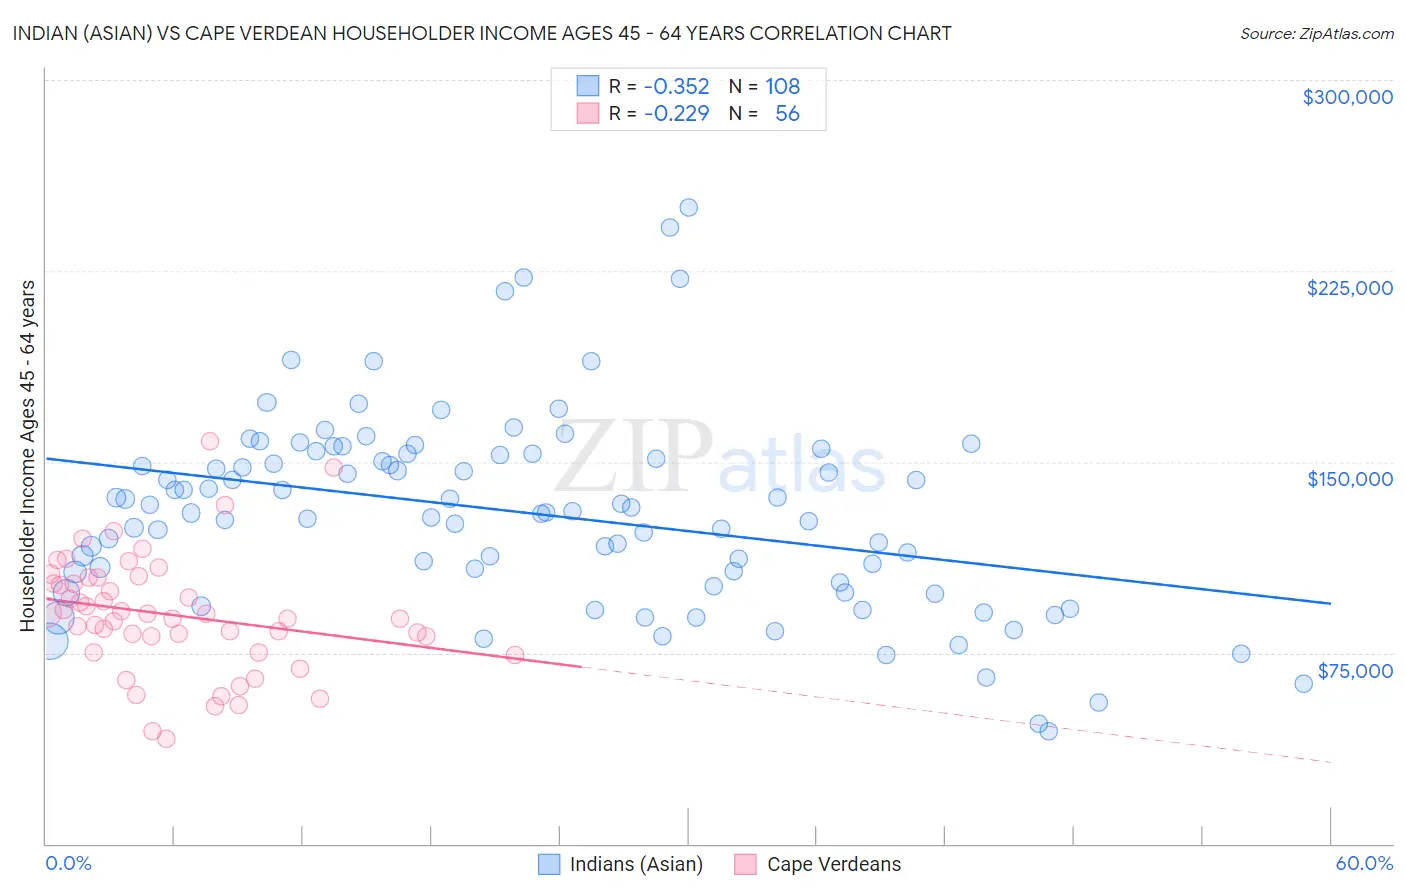 Indian (Asian) vs Cape Verdean Householder Income Ages 45 - 64 years